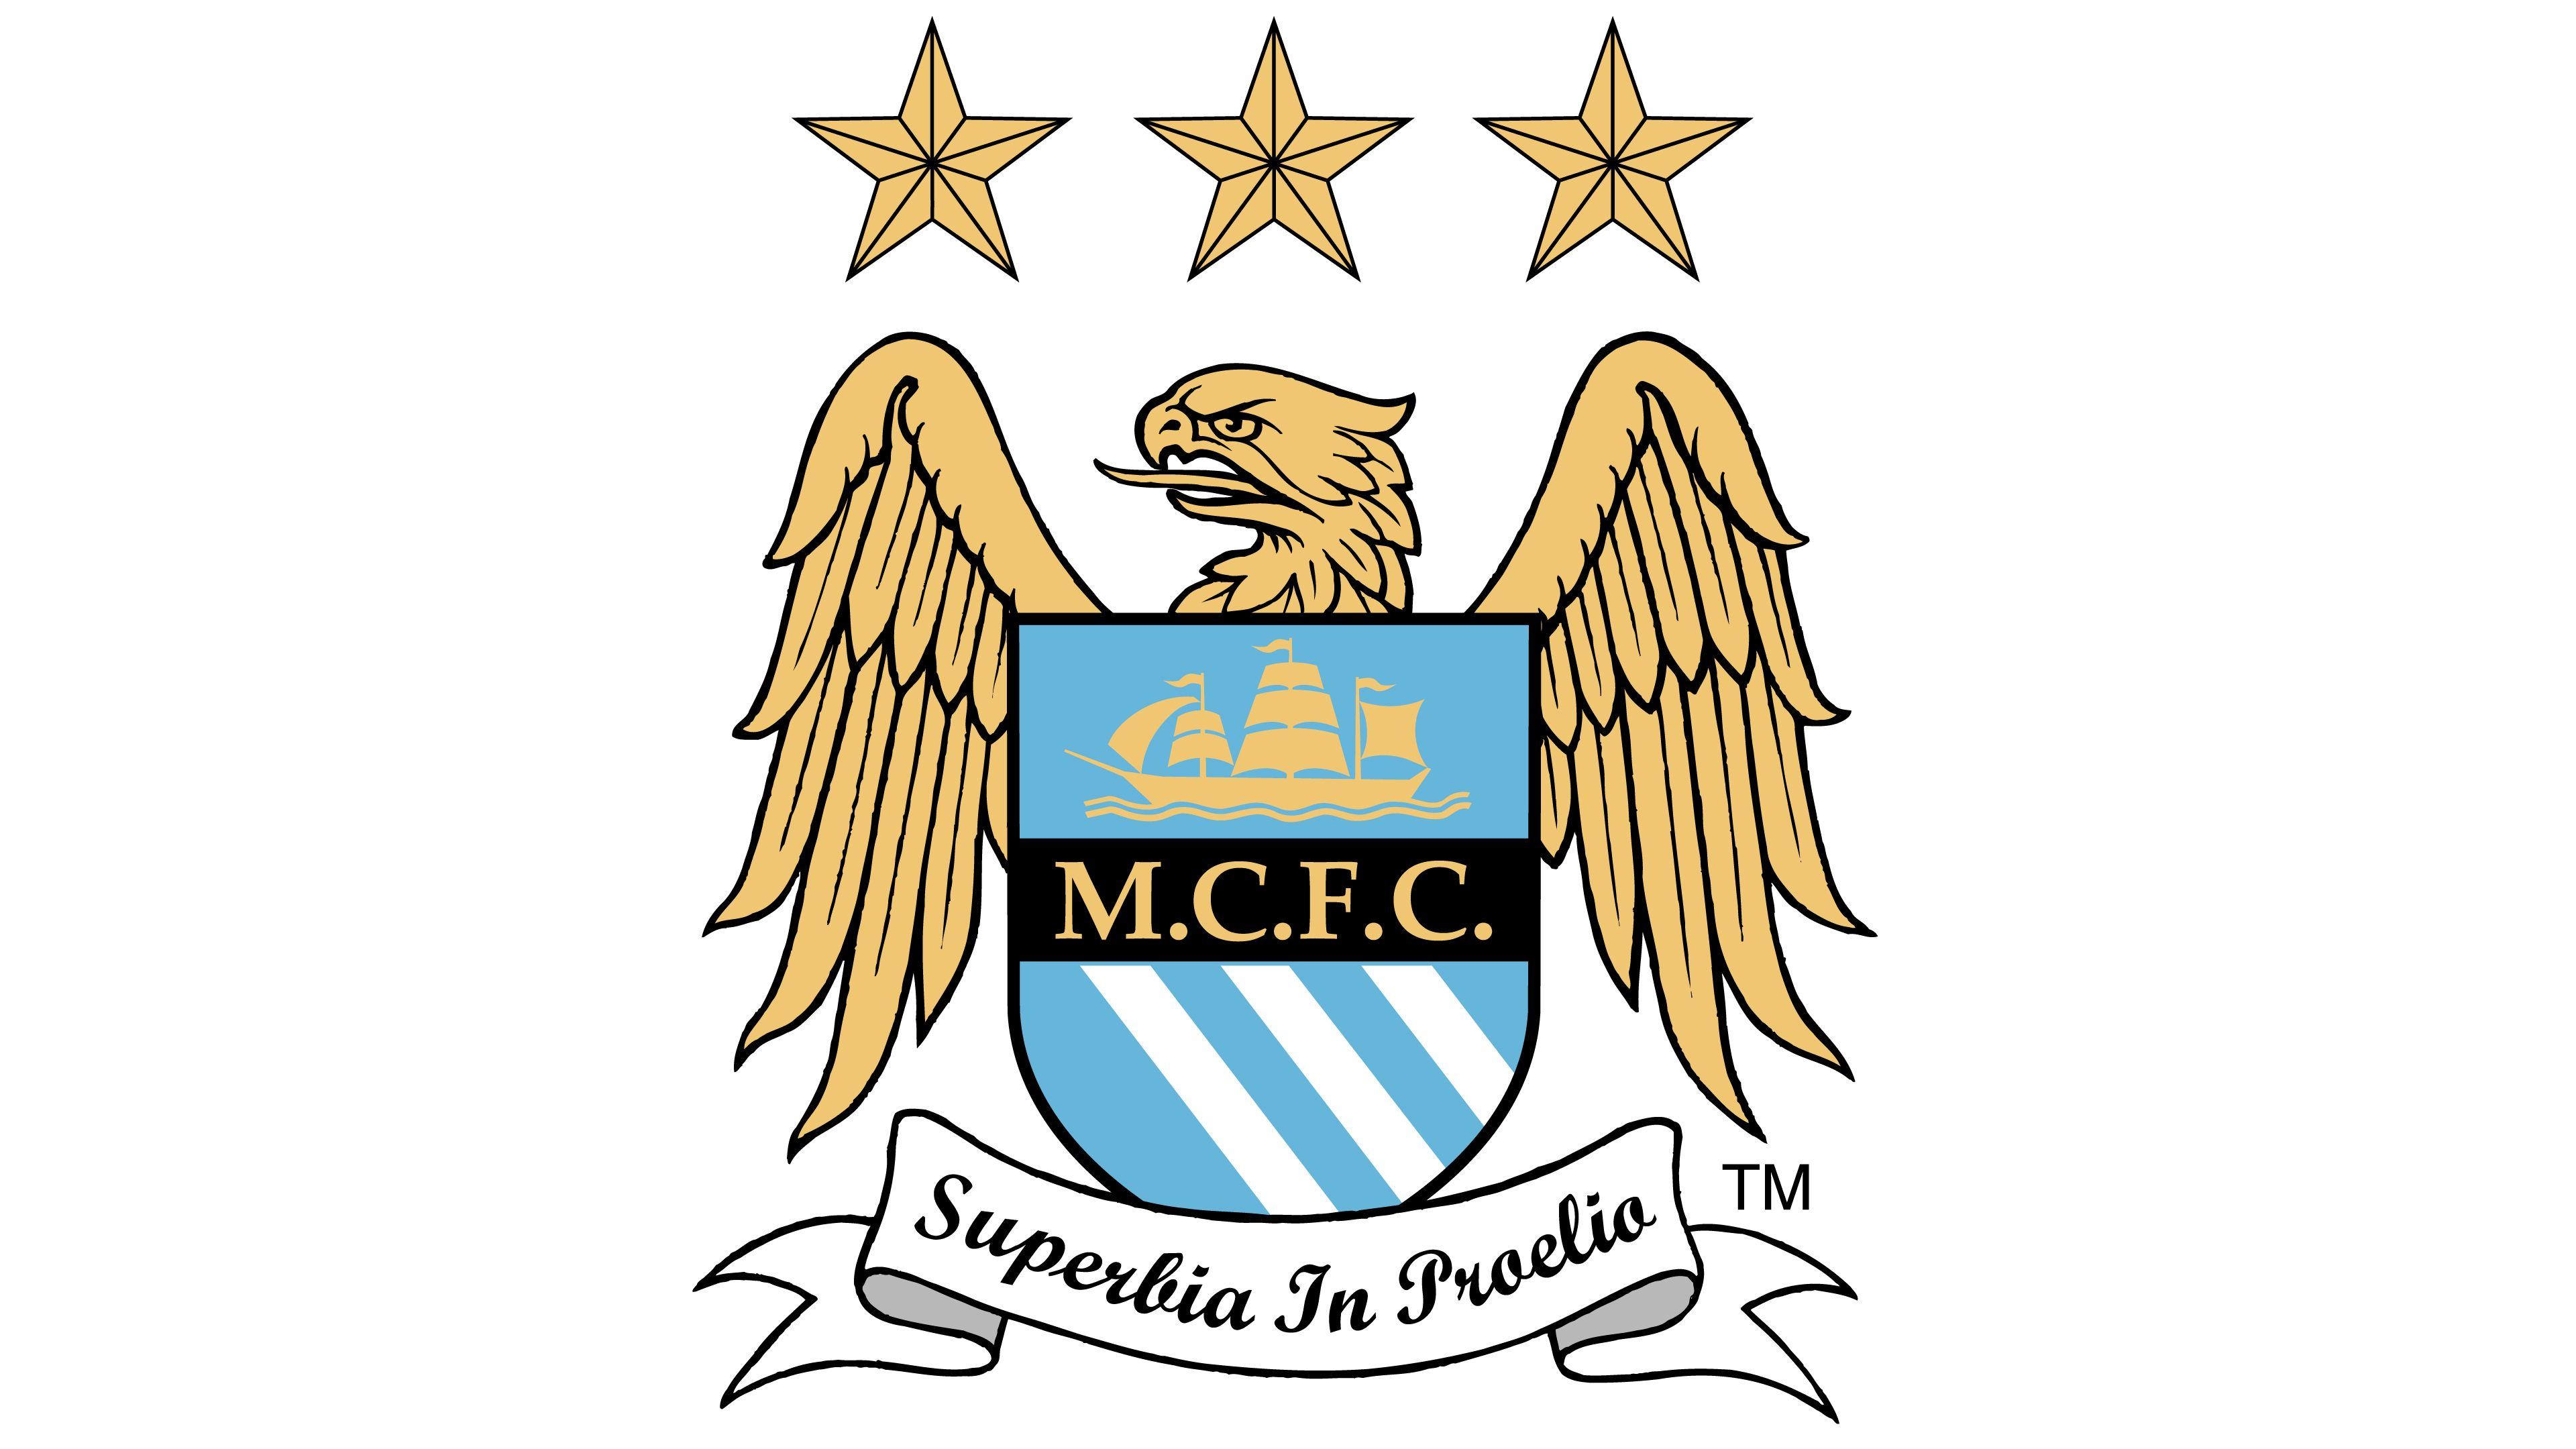 M.C.f.c Logo - Manchester City logo - Interesting History of the Team Name and emblem